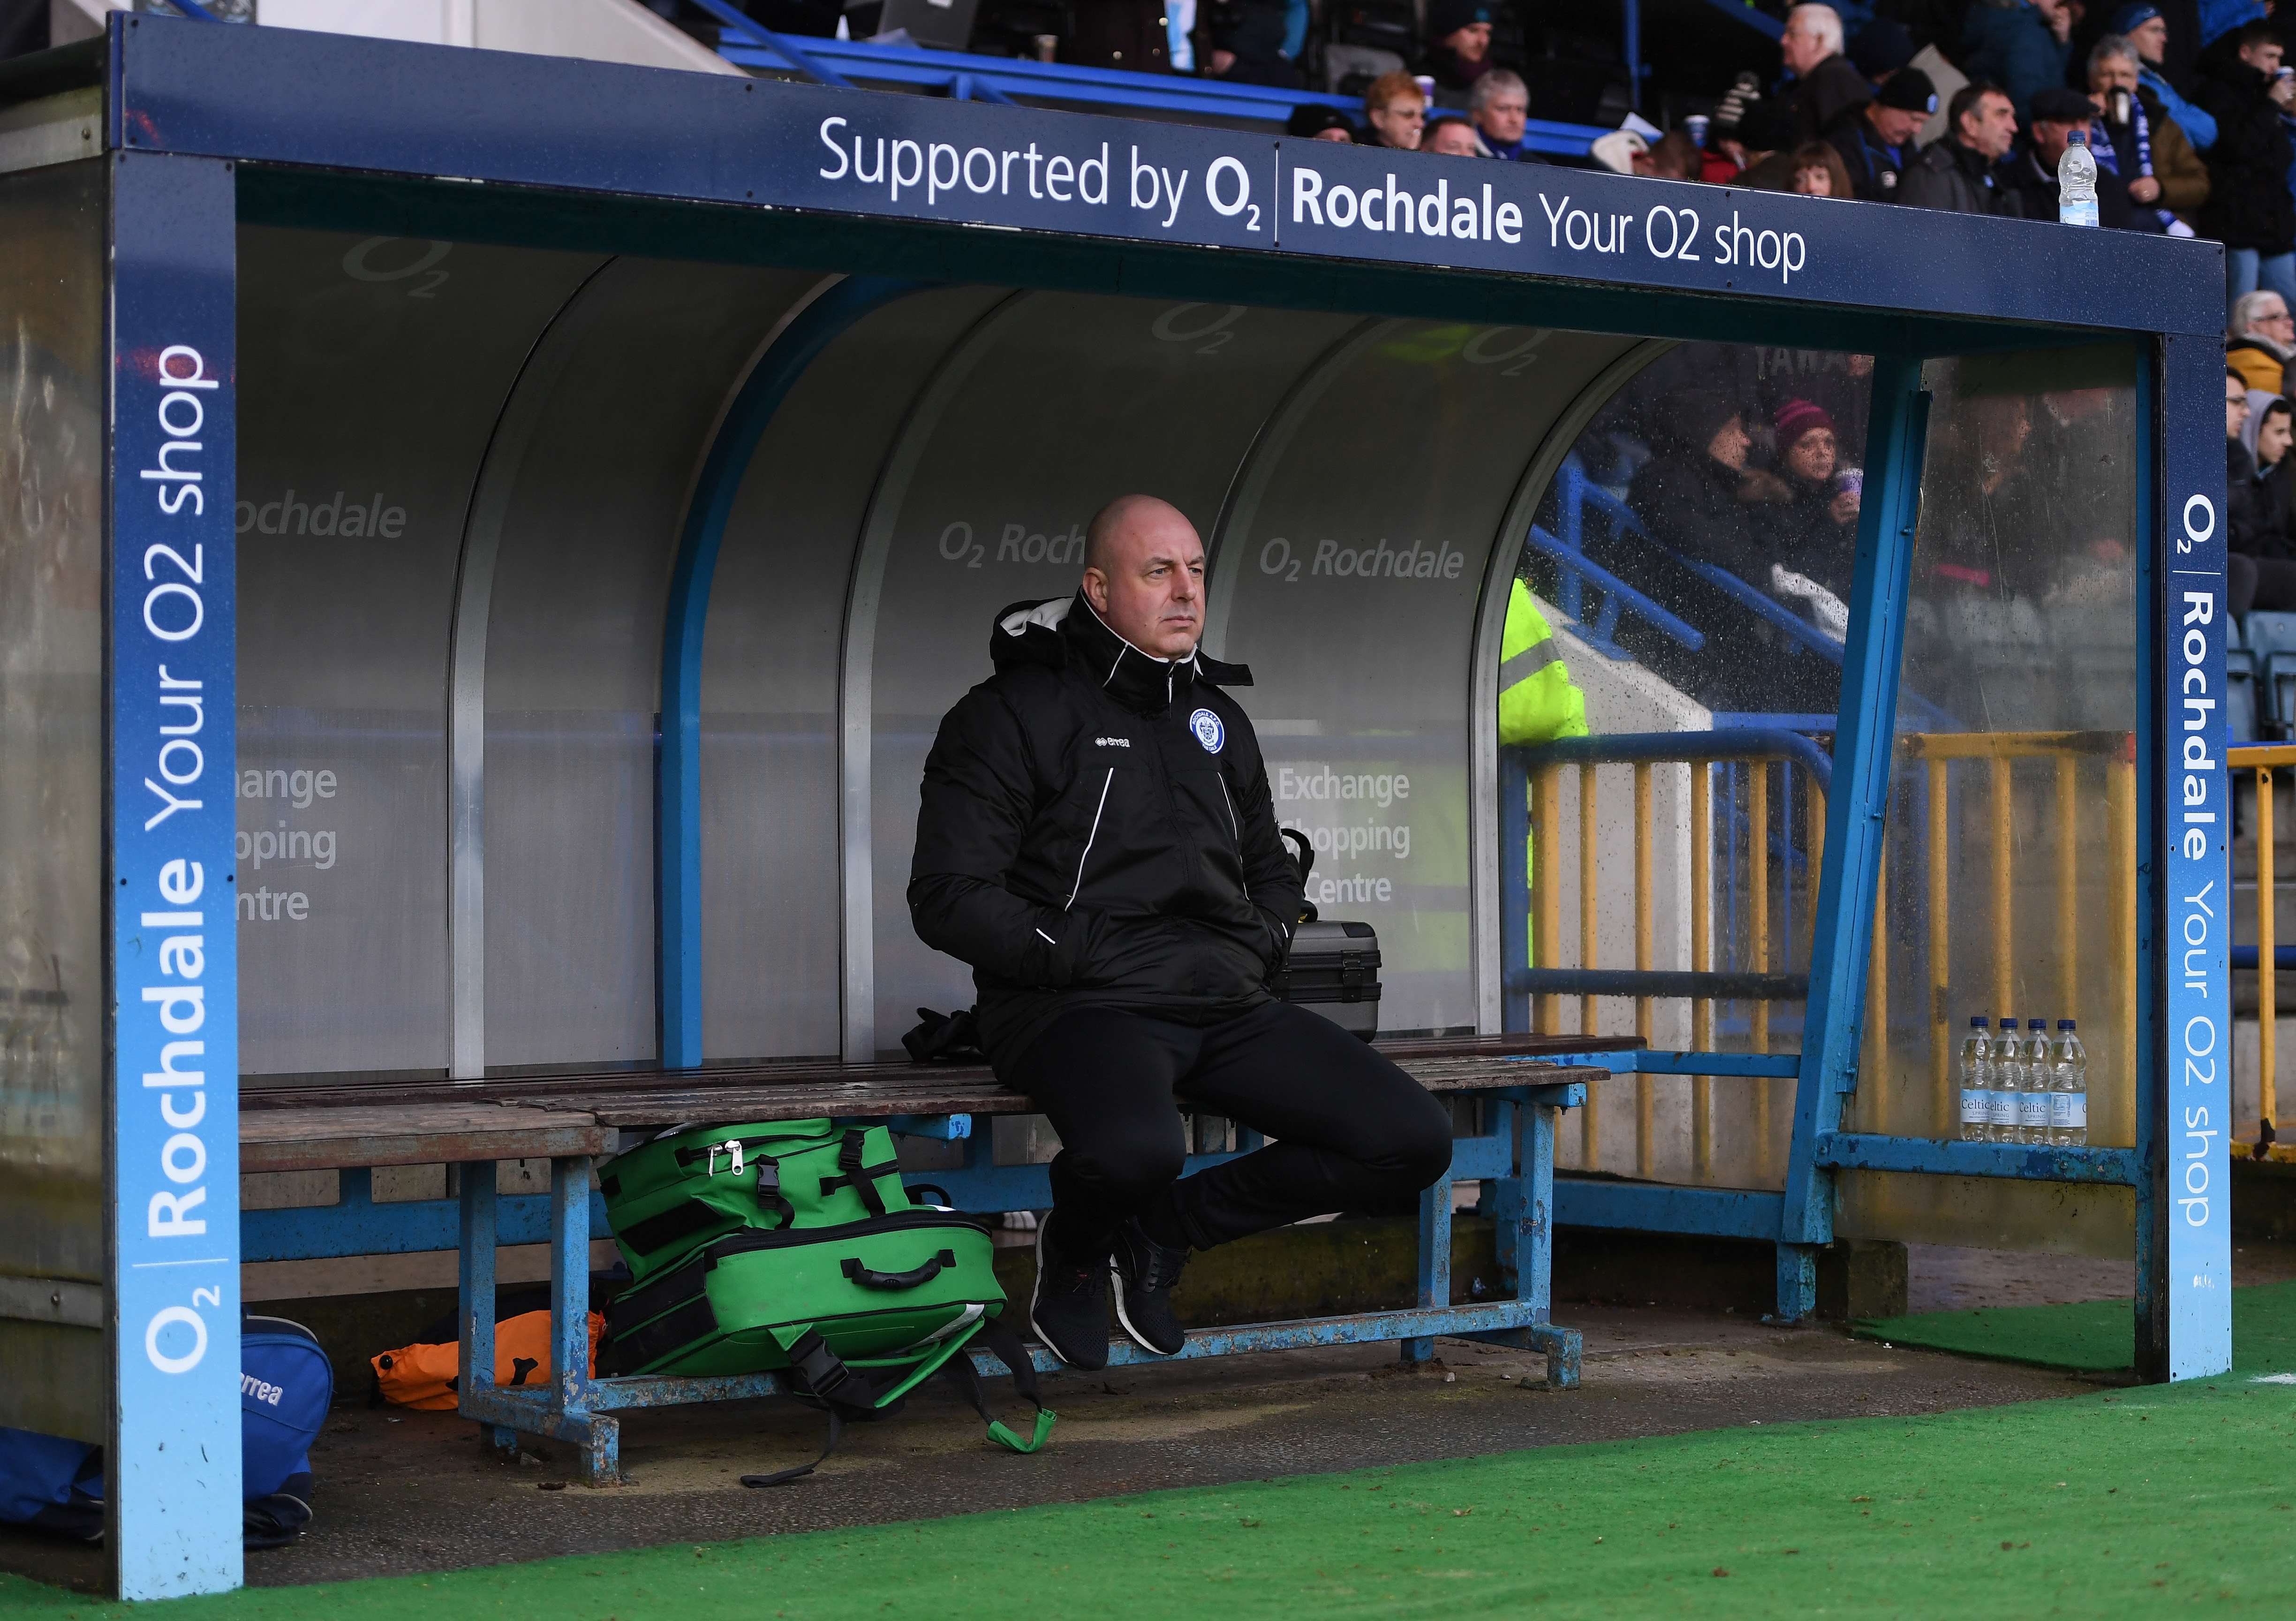 ROCHDALE, ENGLAND - JANUARY 28:  Keith Hill, manager of Rochdale looks on prior to the Emirates FA Cup Fourth Round match between Rochdale and Huddersfield Town at Spotland Stadium on January 28, 2017 in Rochdale, England.  (Photo by Gareth Copley/Getty Images)